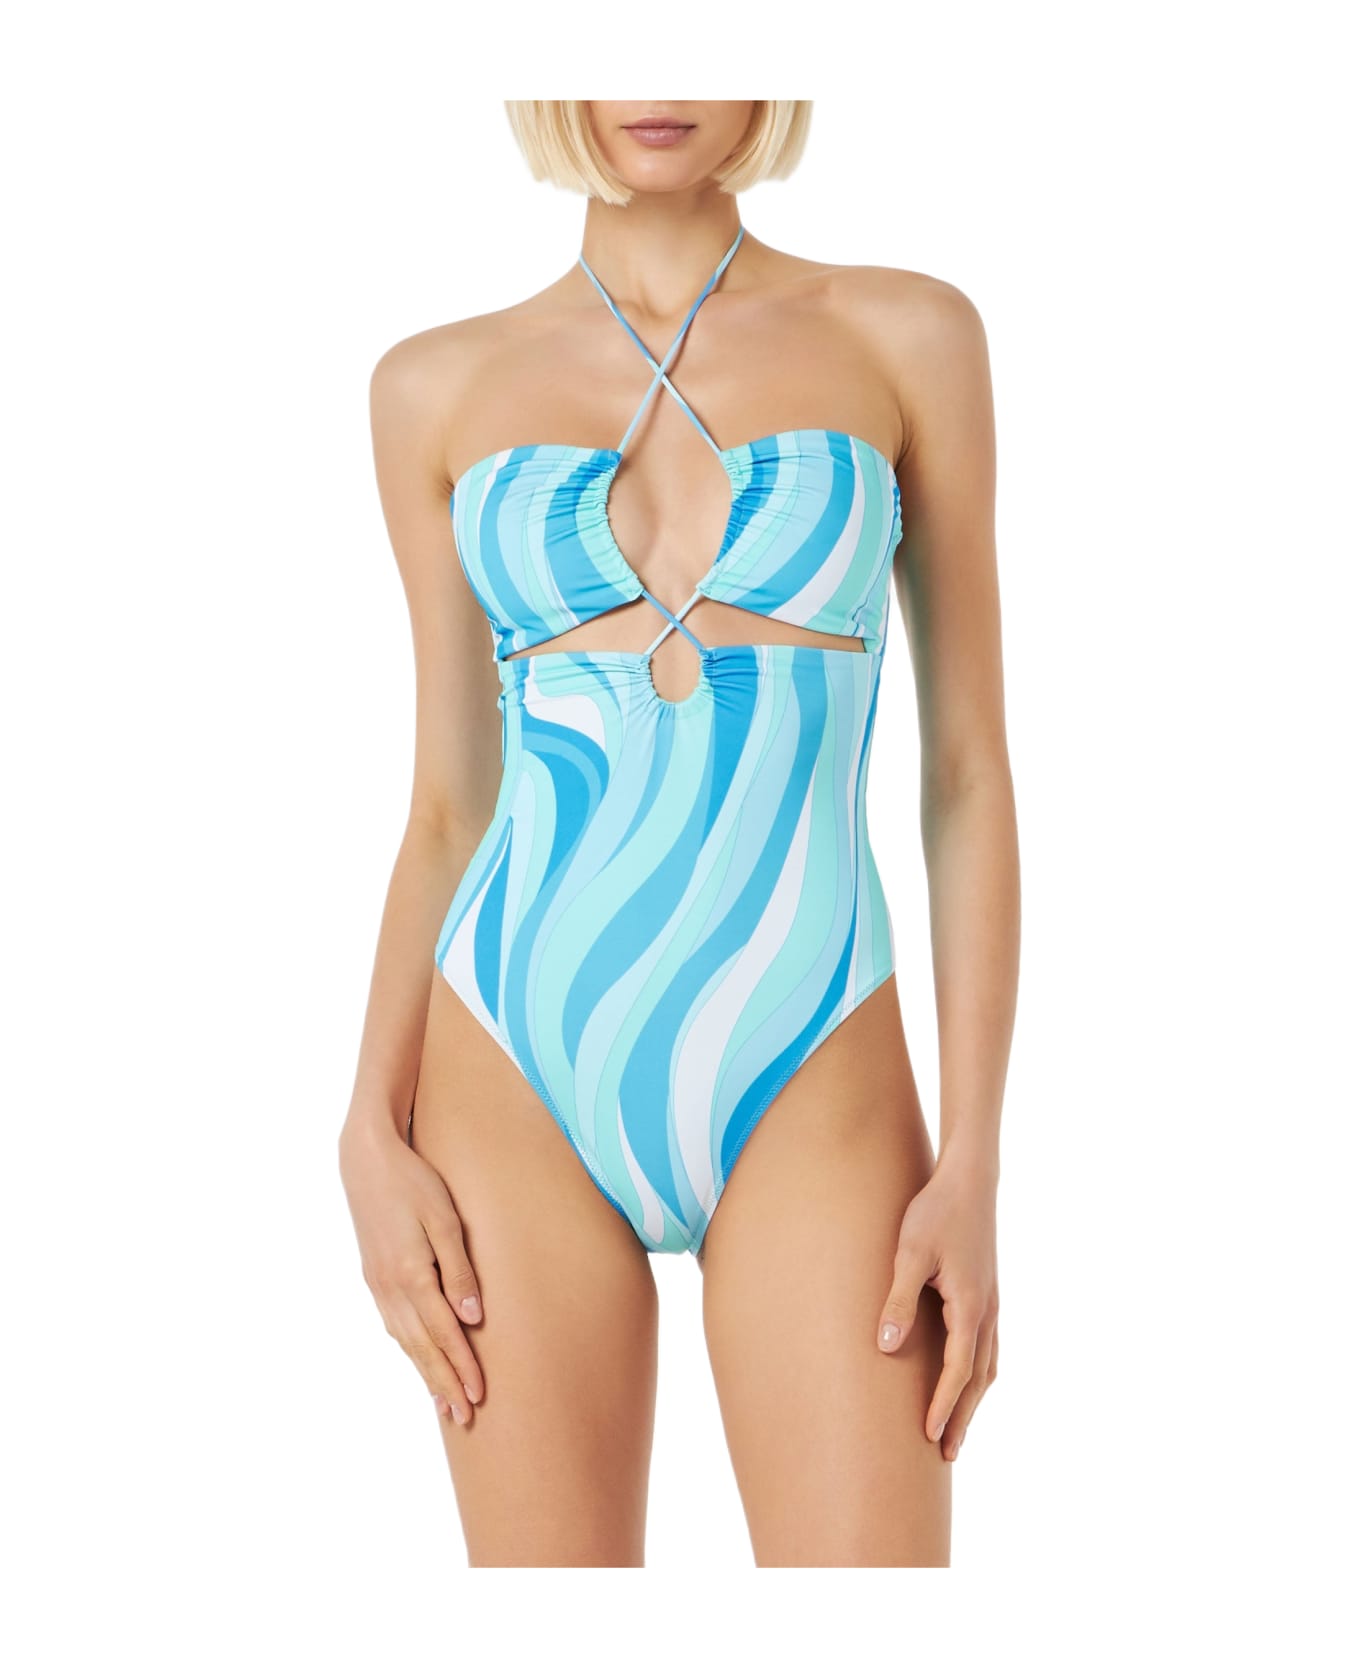 MC2 Saint Barth Cutout One Piece Swimsuit With Wave Print - BLUE ワンピース